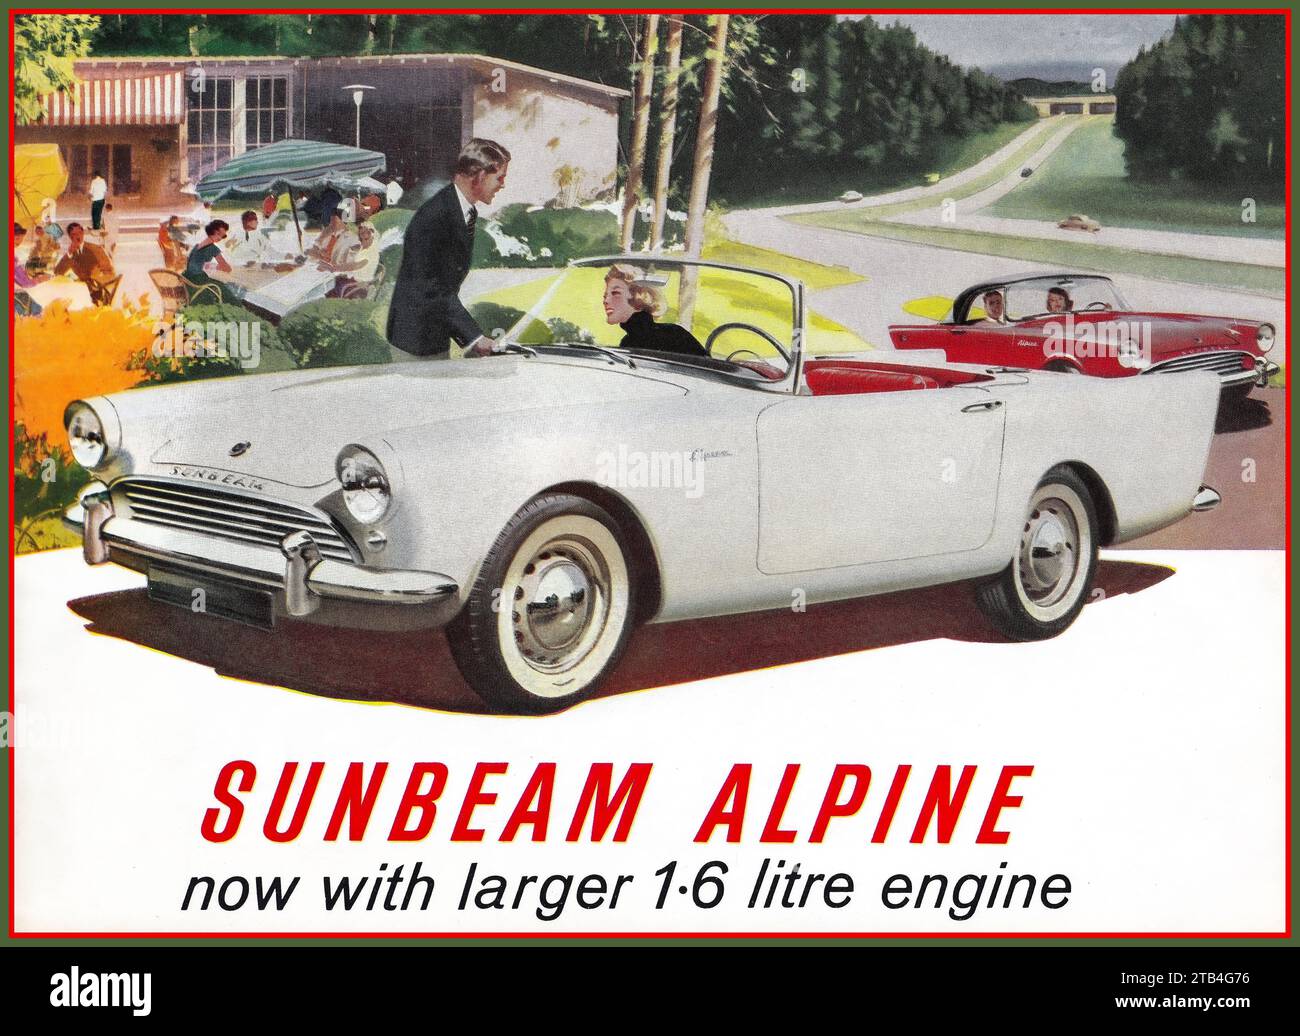 Sunbeam Alpine  2 door sports car coupe 1963 Vintage British made manufactured car advertising UK  'SUNBEAM ALPINE now with larger 1.6 litre engine.' Stock Photo